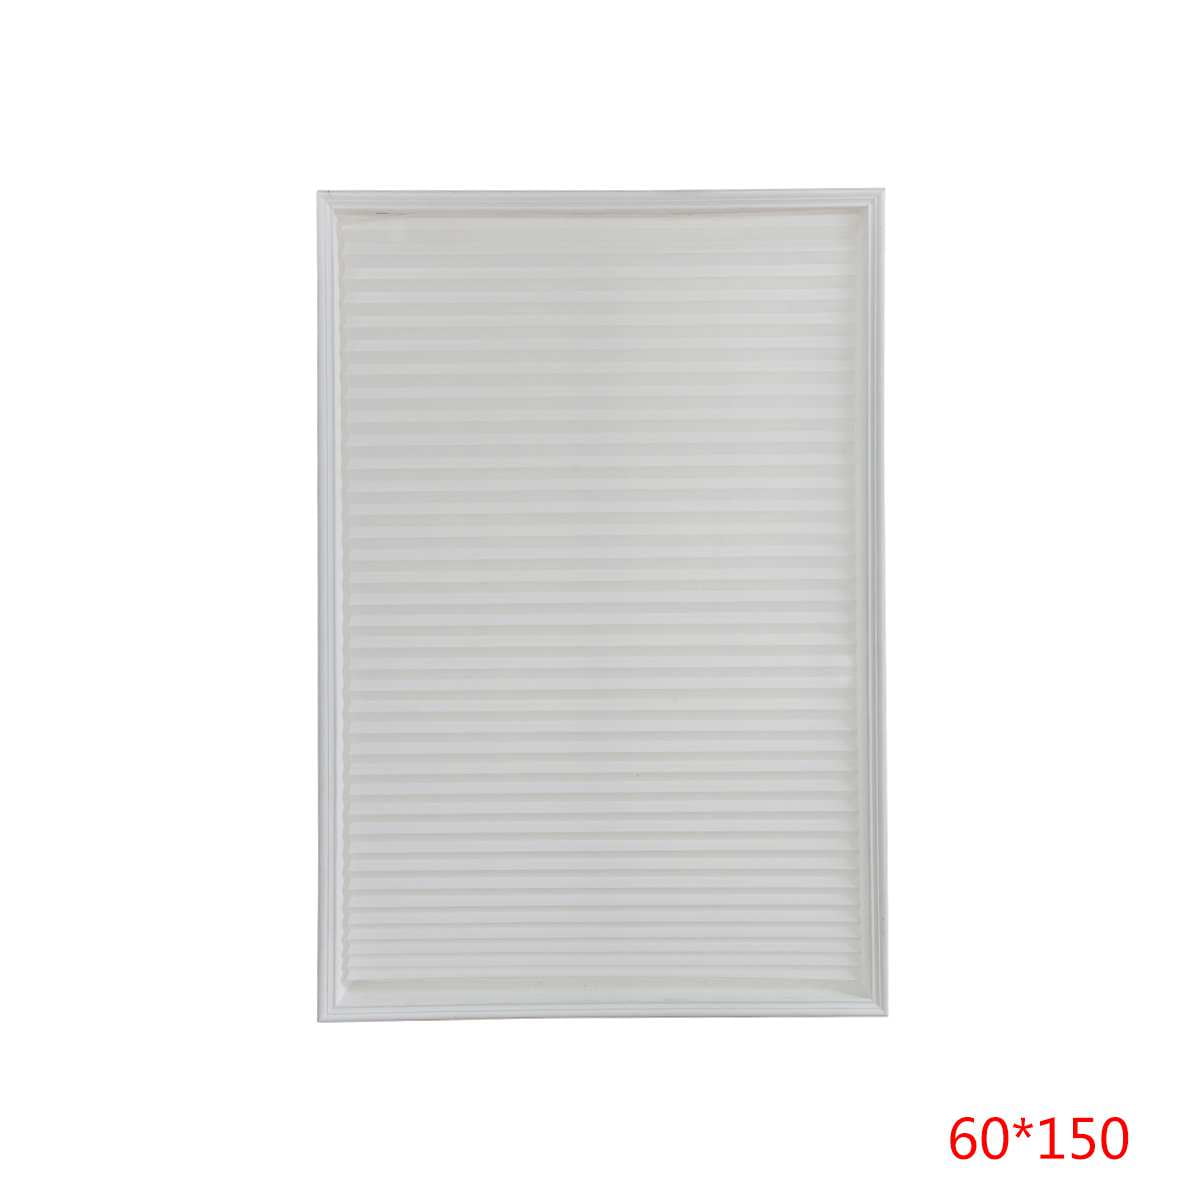 4 Size Self-Adhesive Pleated Blinds Bathroom Half Blackout Window Shade Curtains 